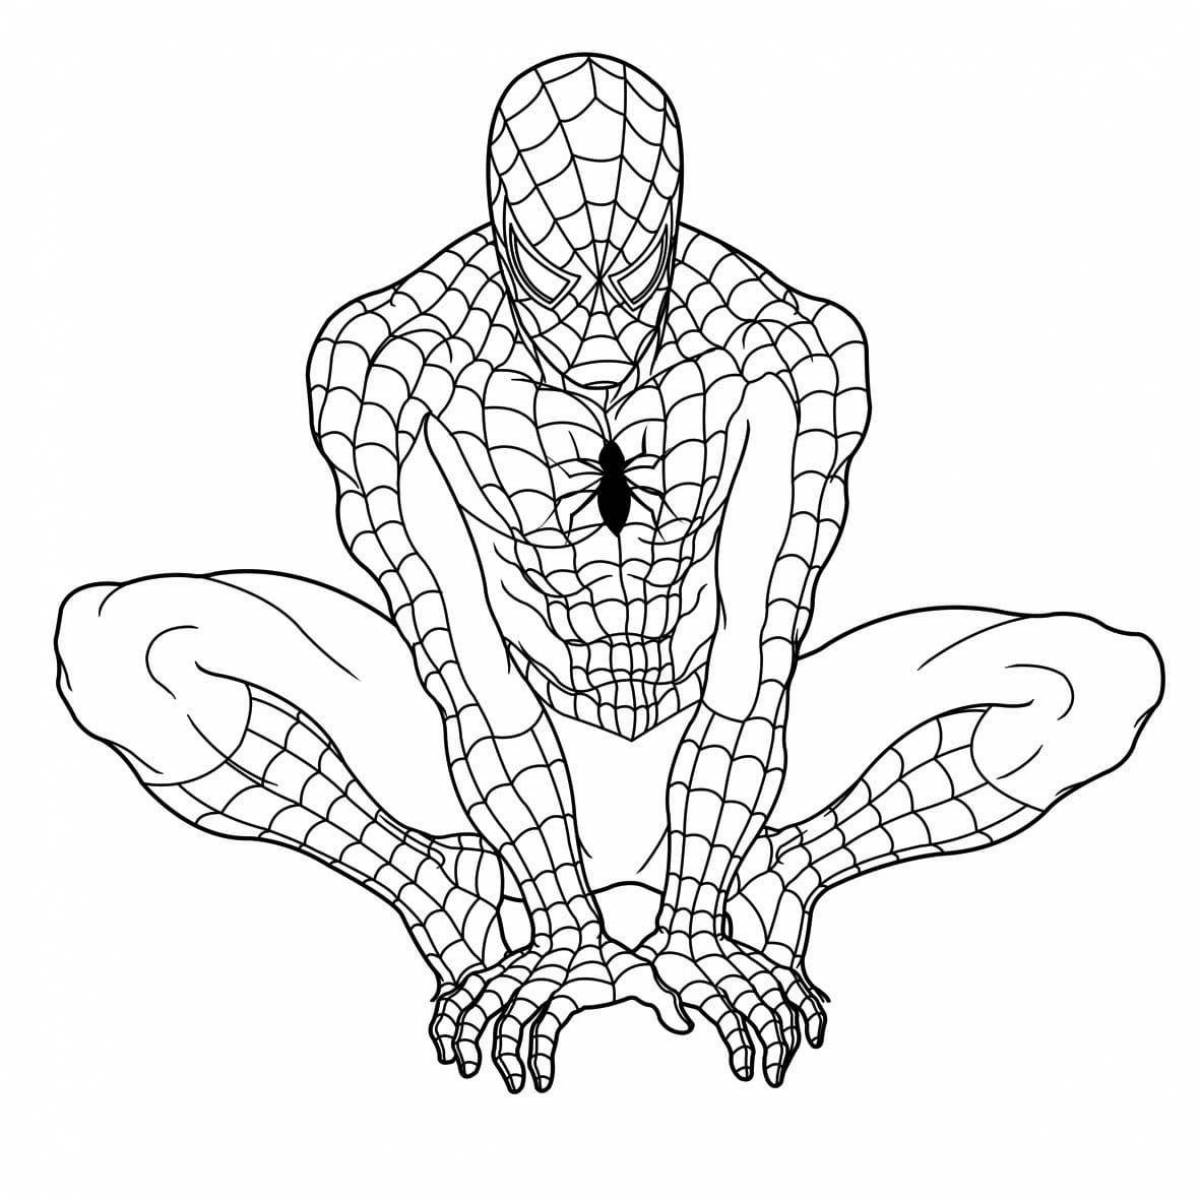 Sweet spider-man girl coloring book